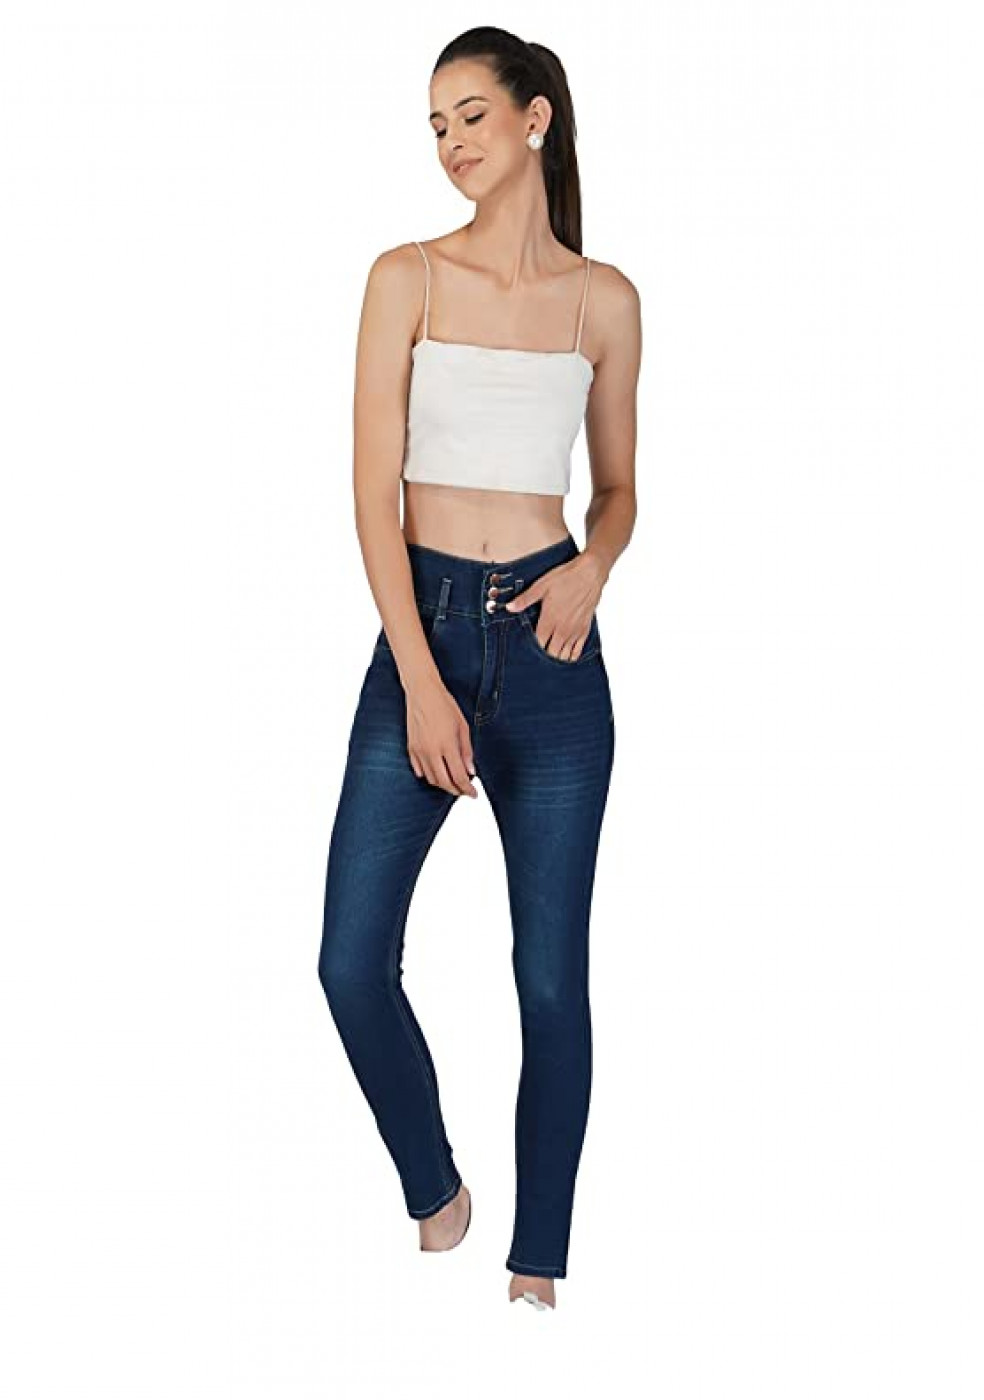 HARD Blue Stretchable Cotton Jeans For Women